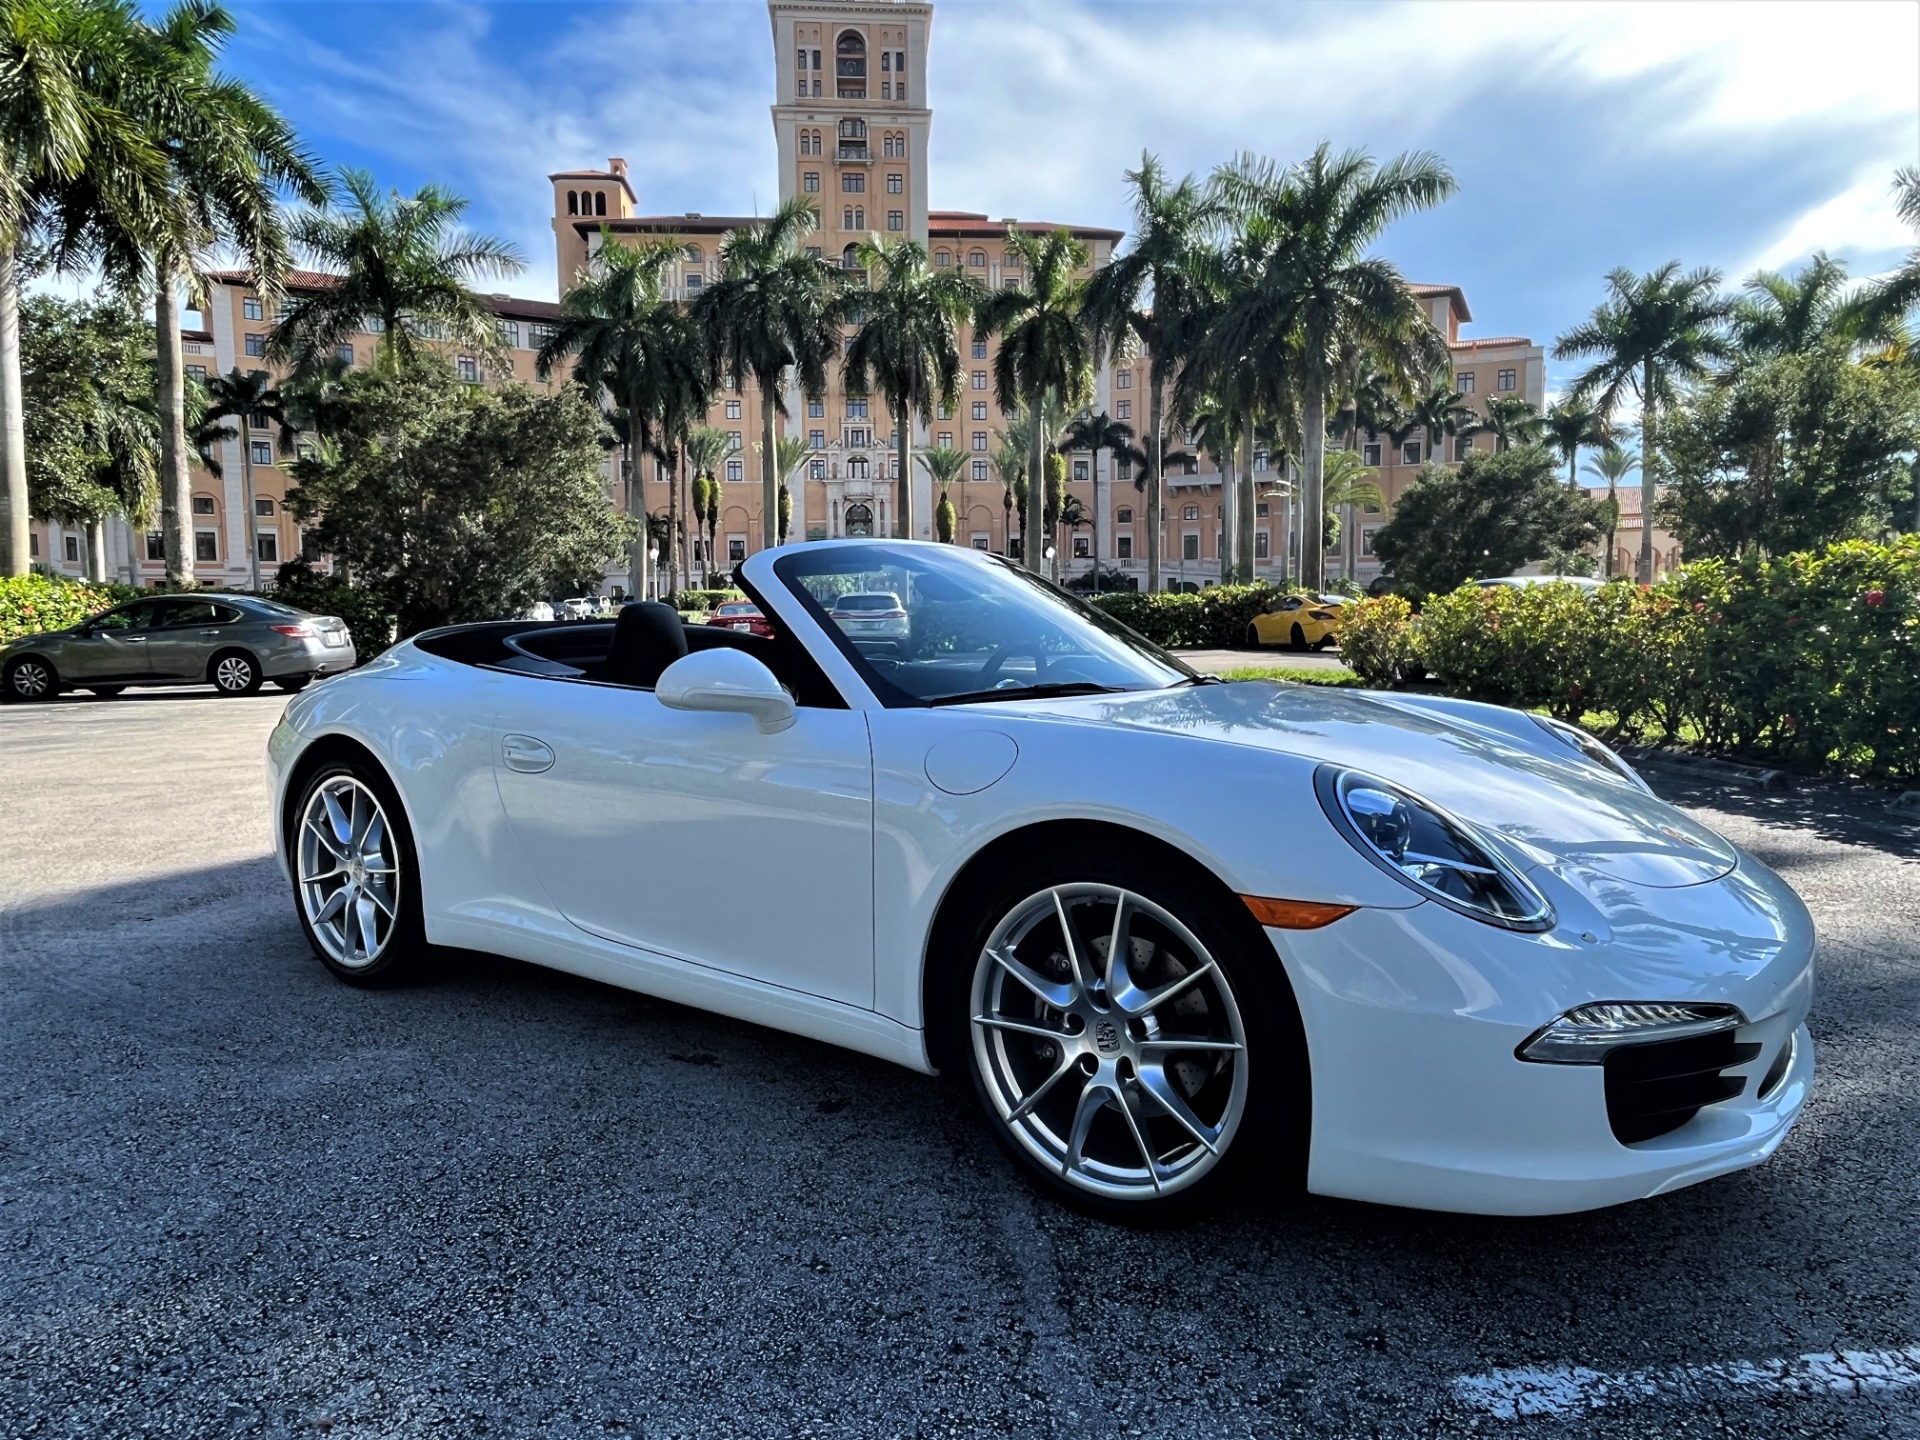 Used 2014 Porsche 911 Carrera for sale Sold at The Gables Sports Cars in Miami FL 33146 1